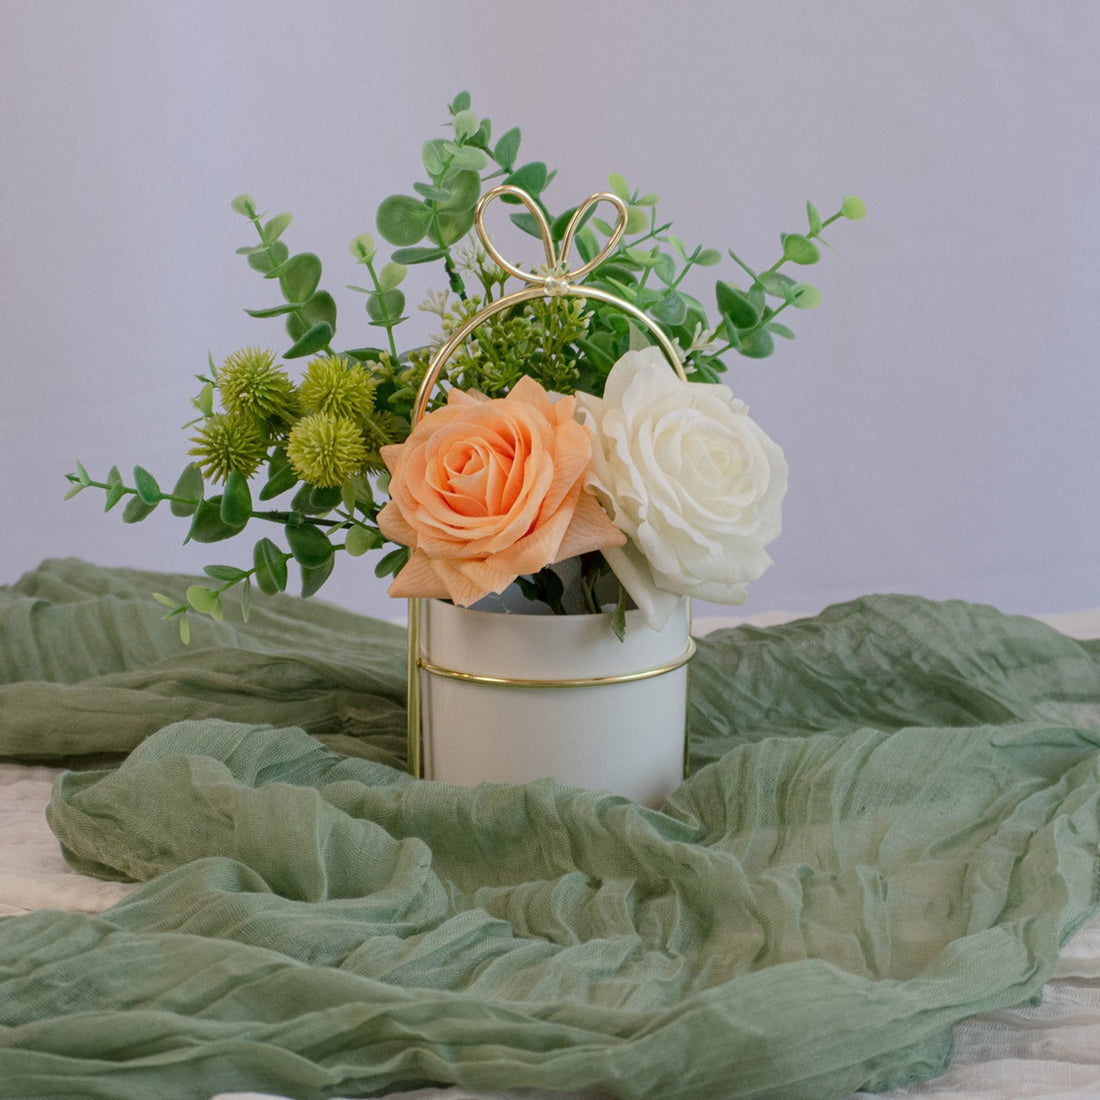 8in tall, 9in wide centerpiece with lifelike roses and eucalyptus, ideal for table decor. Available for rent in Edmonton, Sherwood Park, Leduc, and St. Albert, Alberta